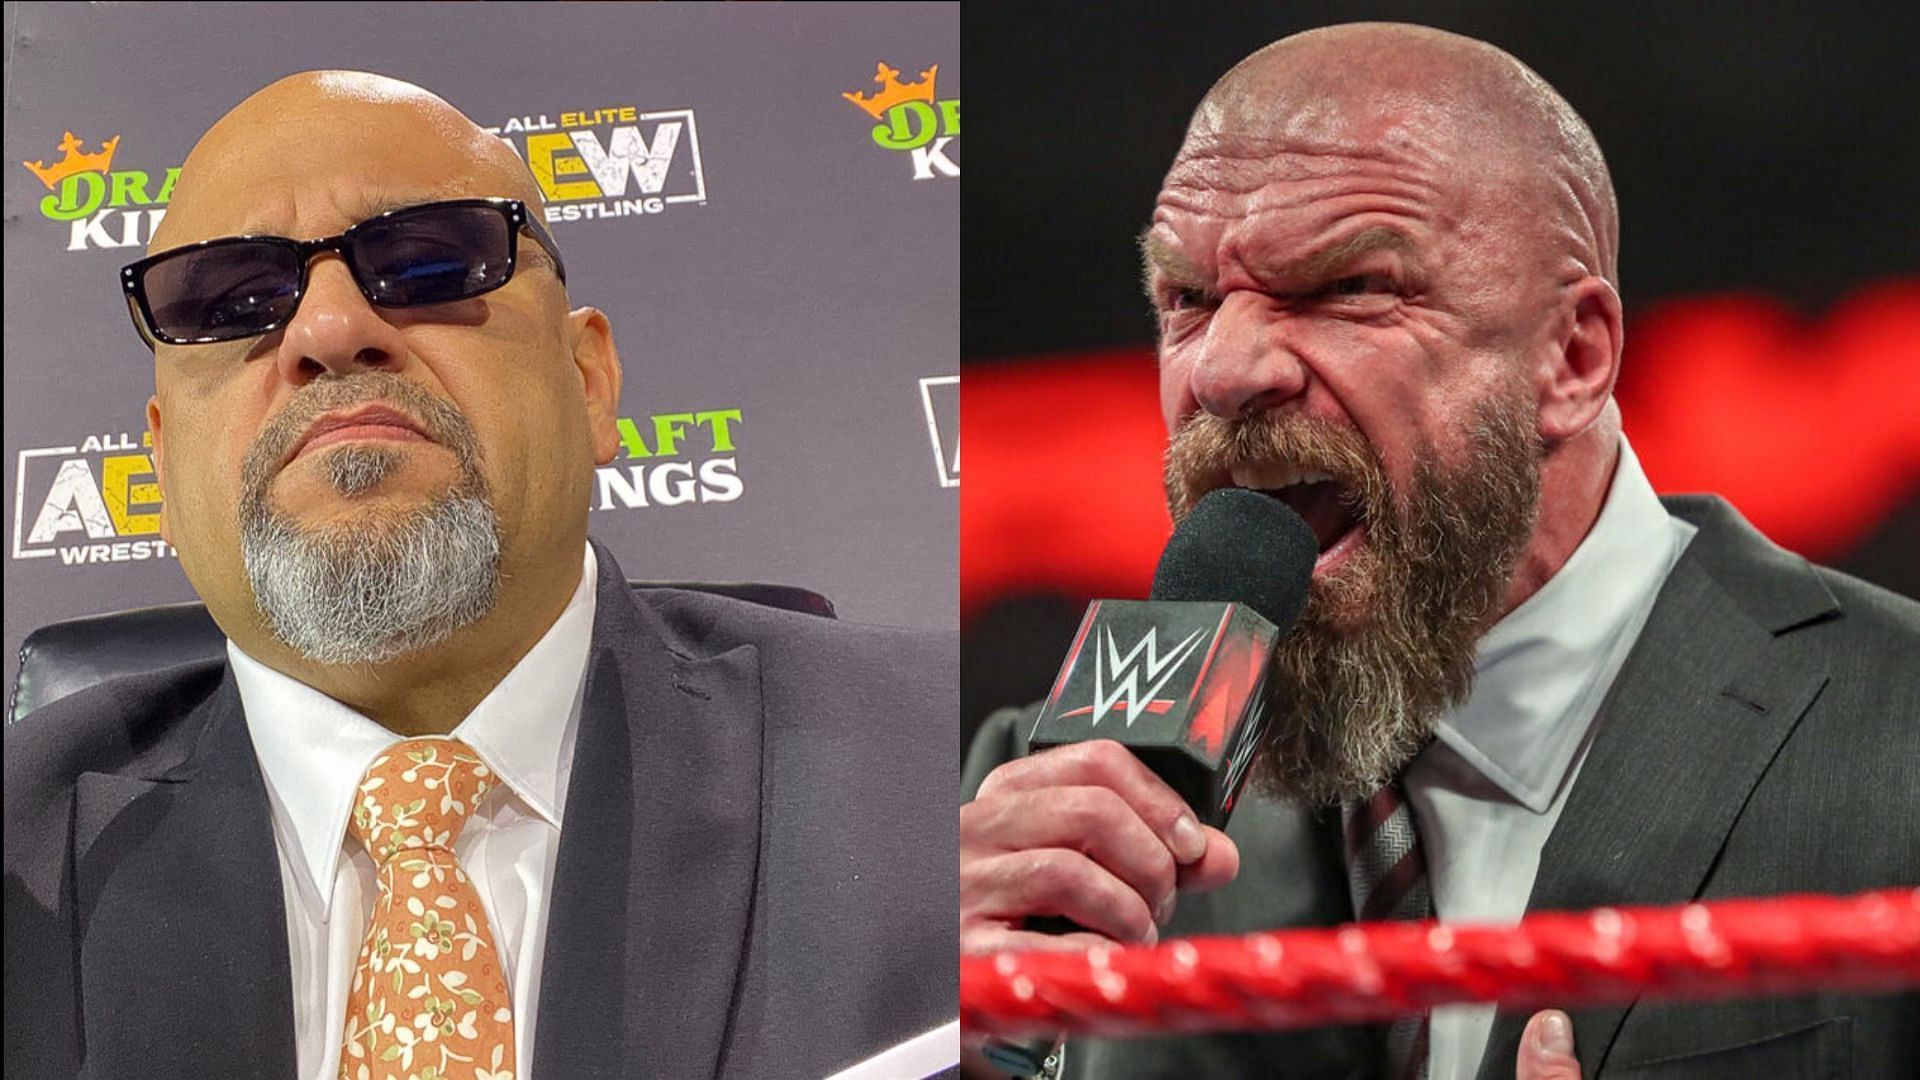 Taz is an ECW legend who now works commentary with AEW [Photo courtesy of Taz